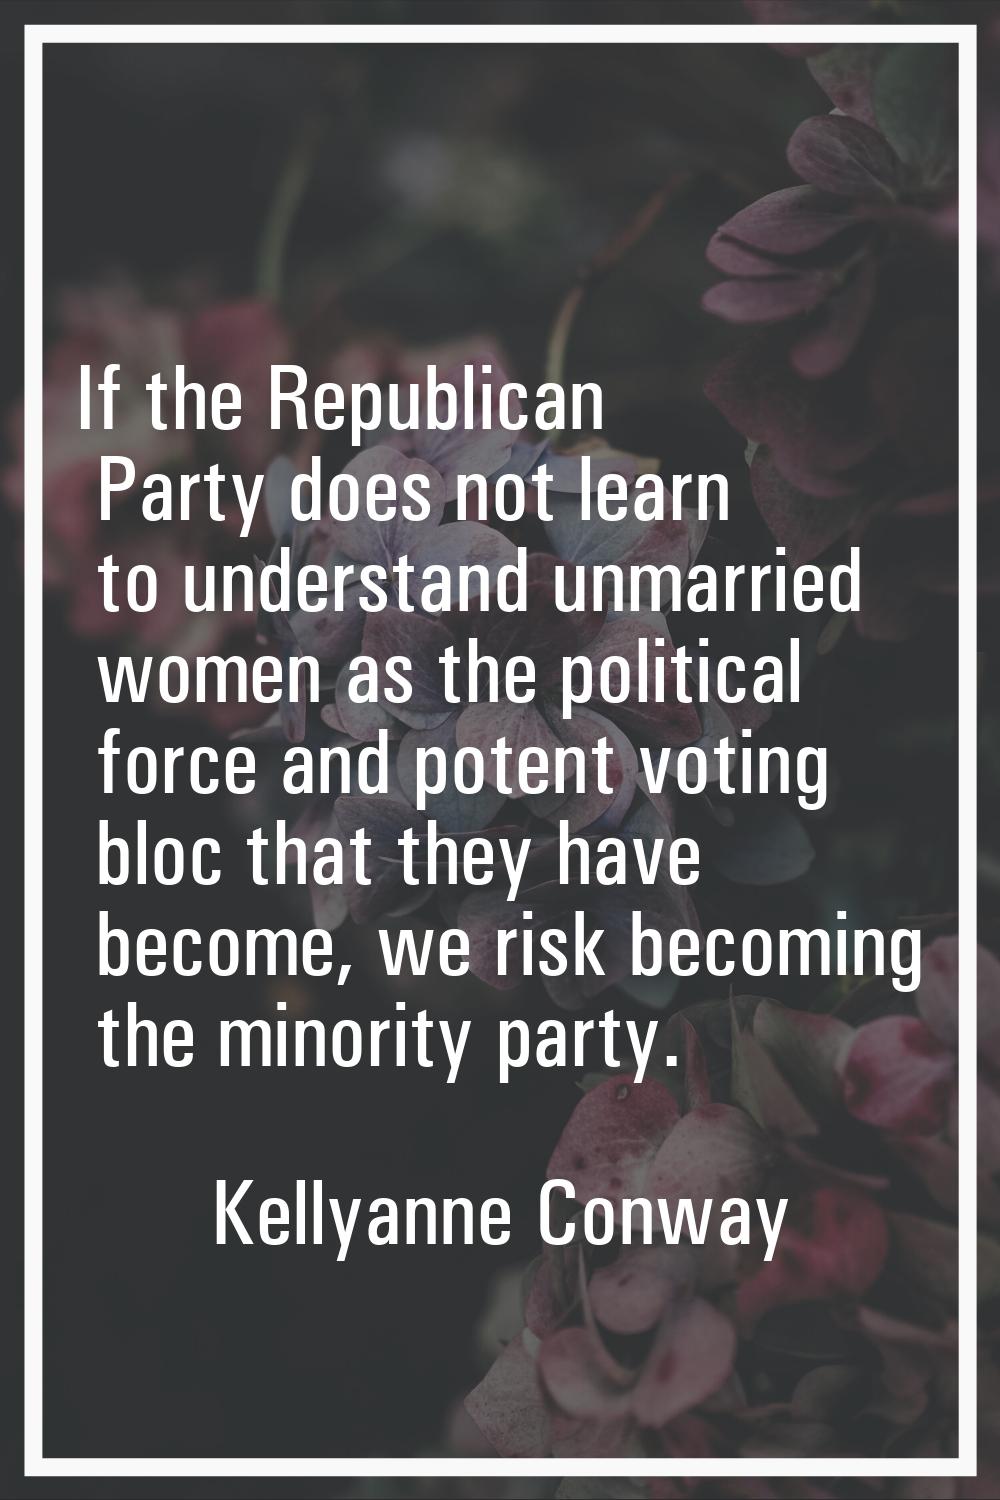 If the Republican Party does not learn to understand unmarried women as the political force and pot